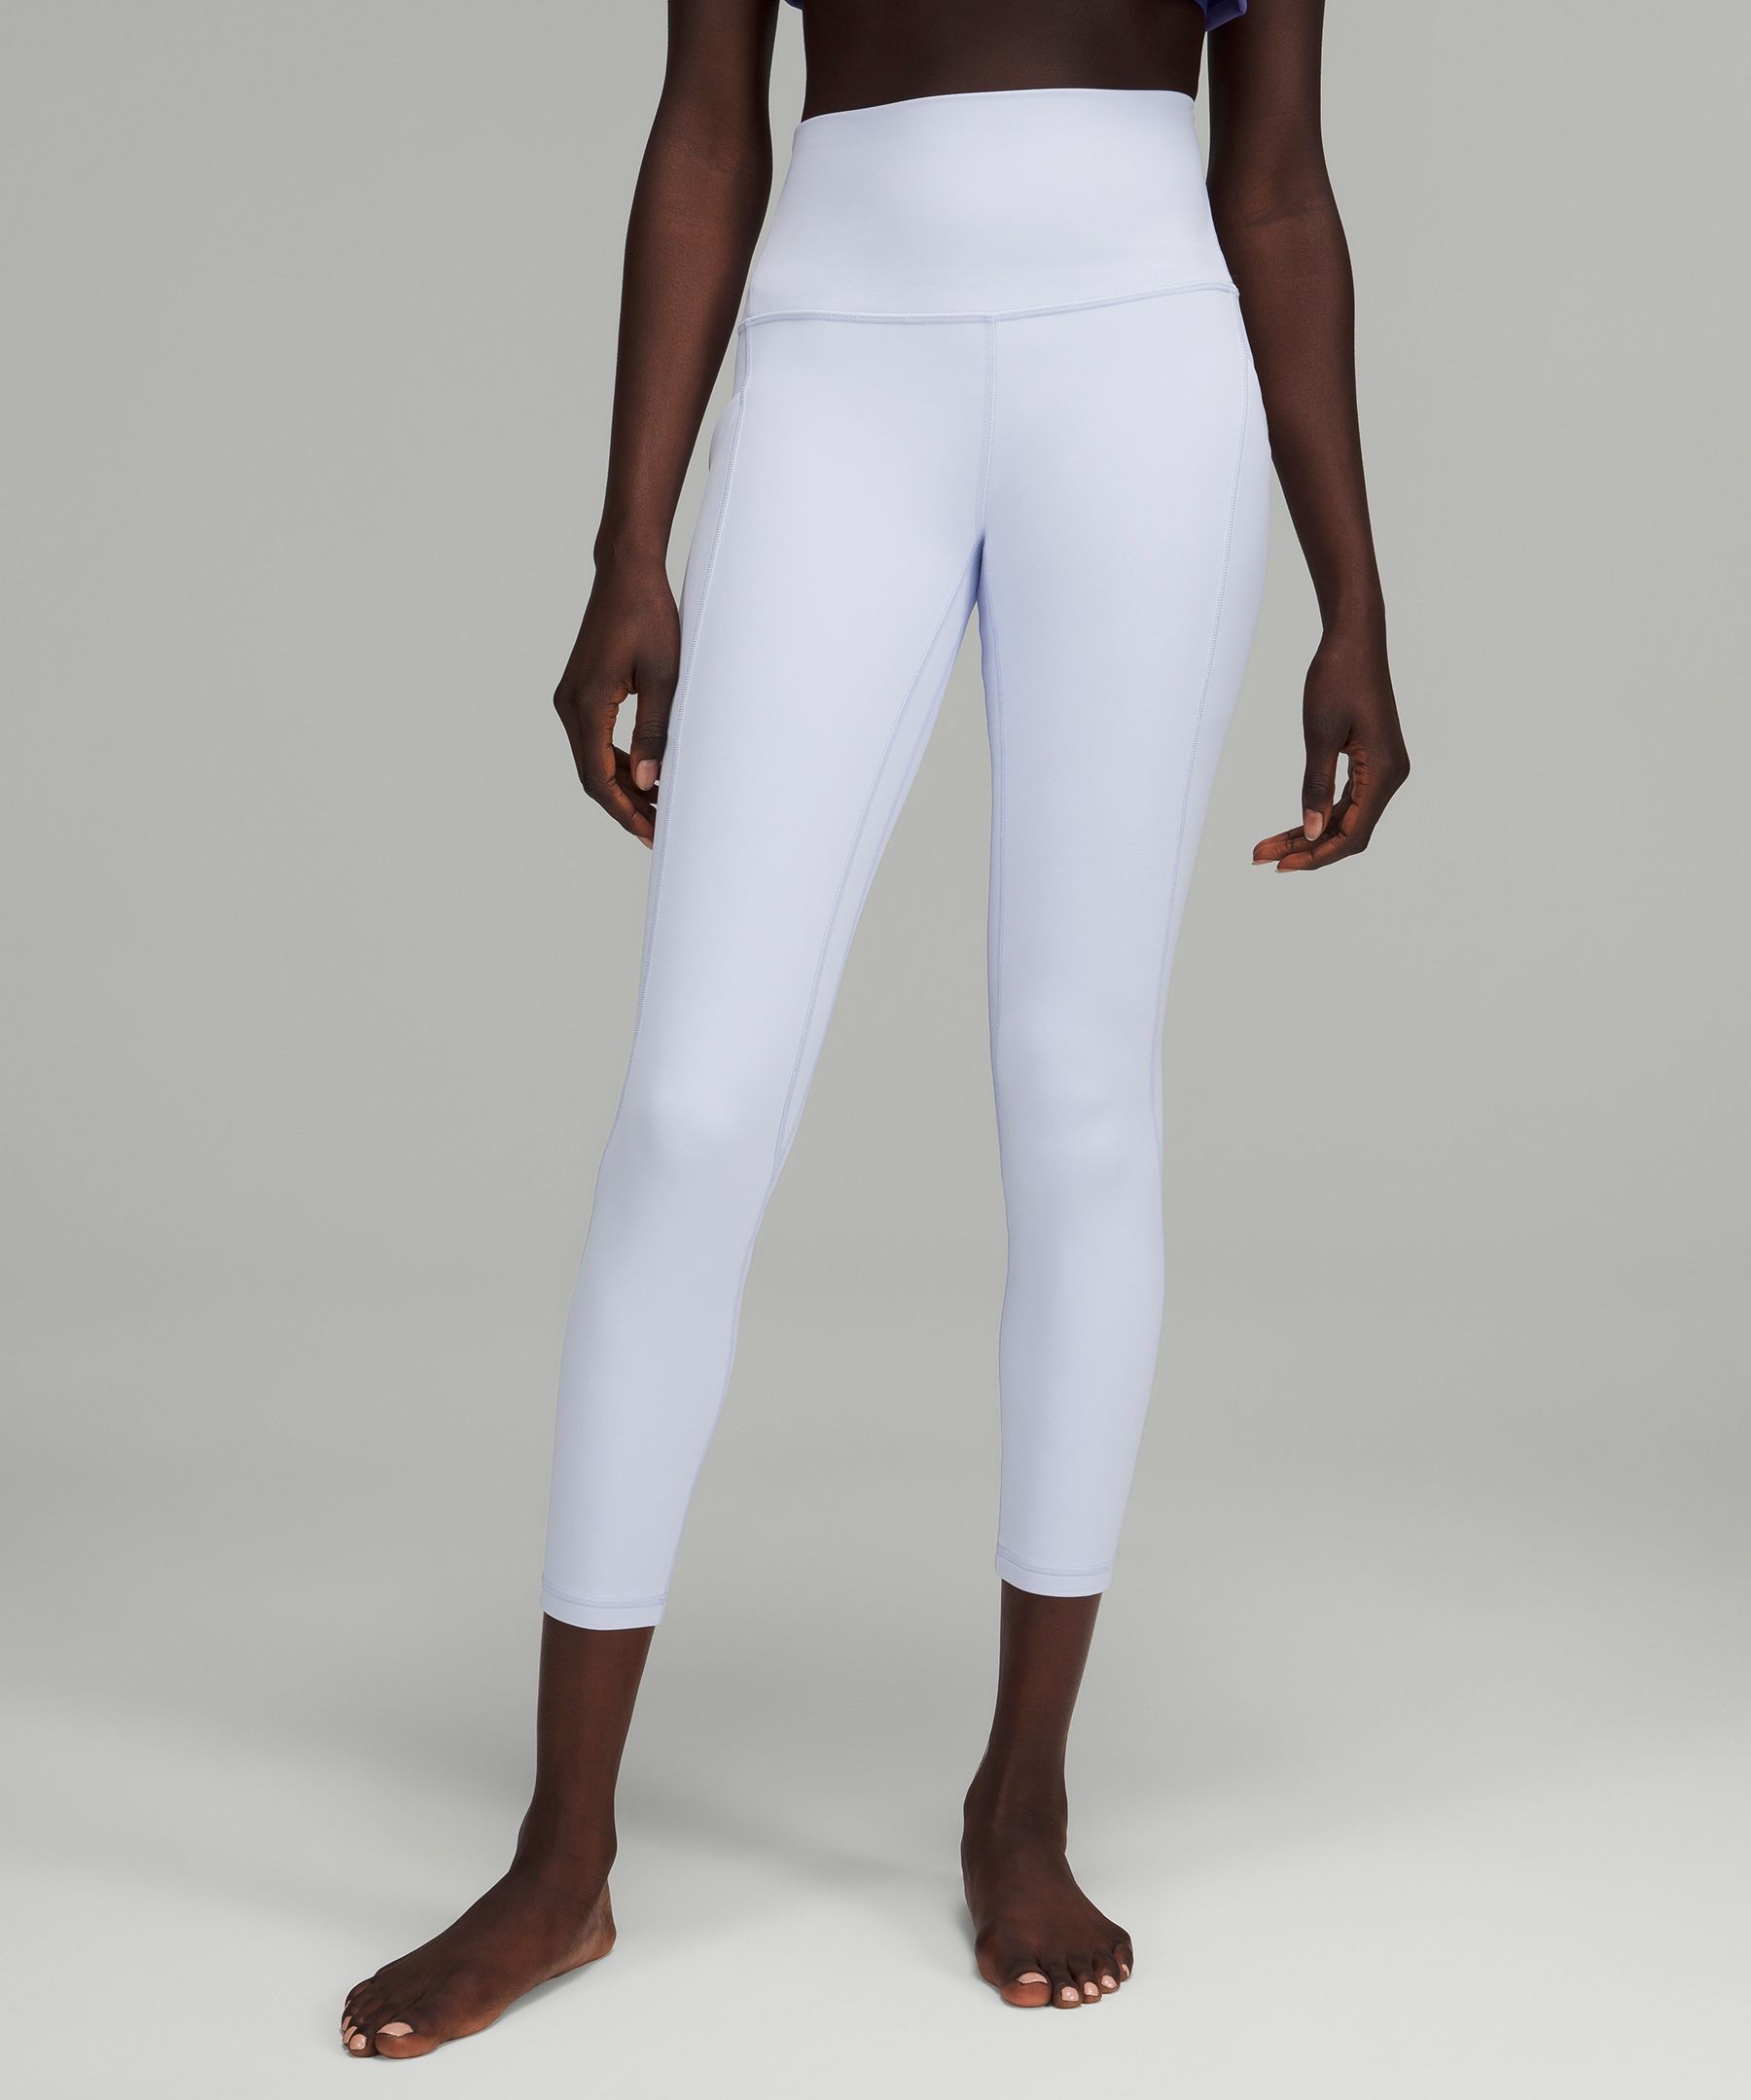 Lululemon Align™ High-rise Pants With Pockets 25" In Pastel Blue